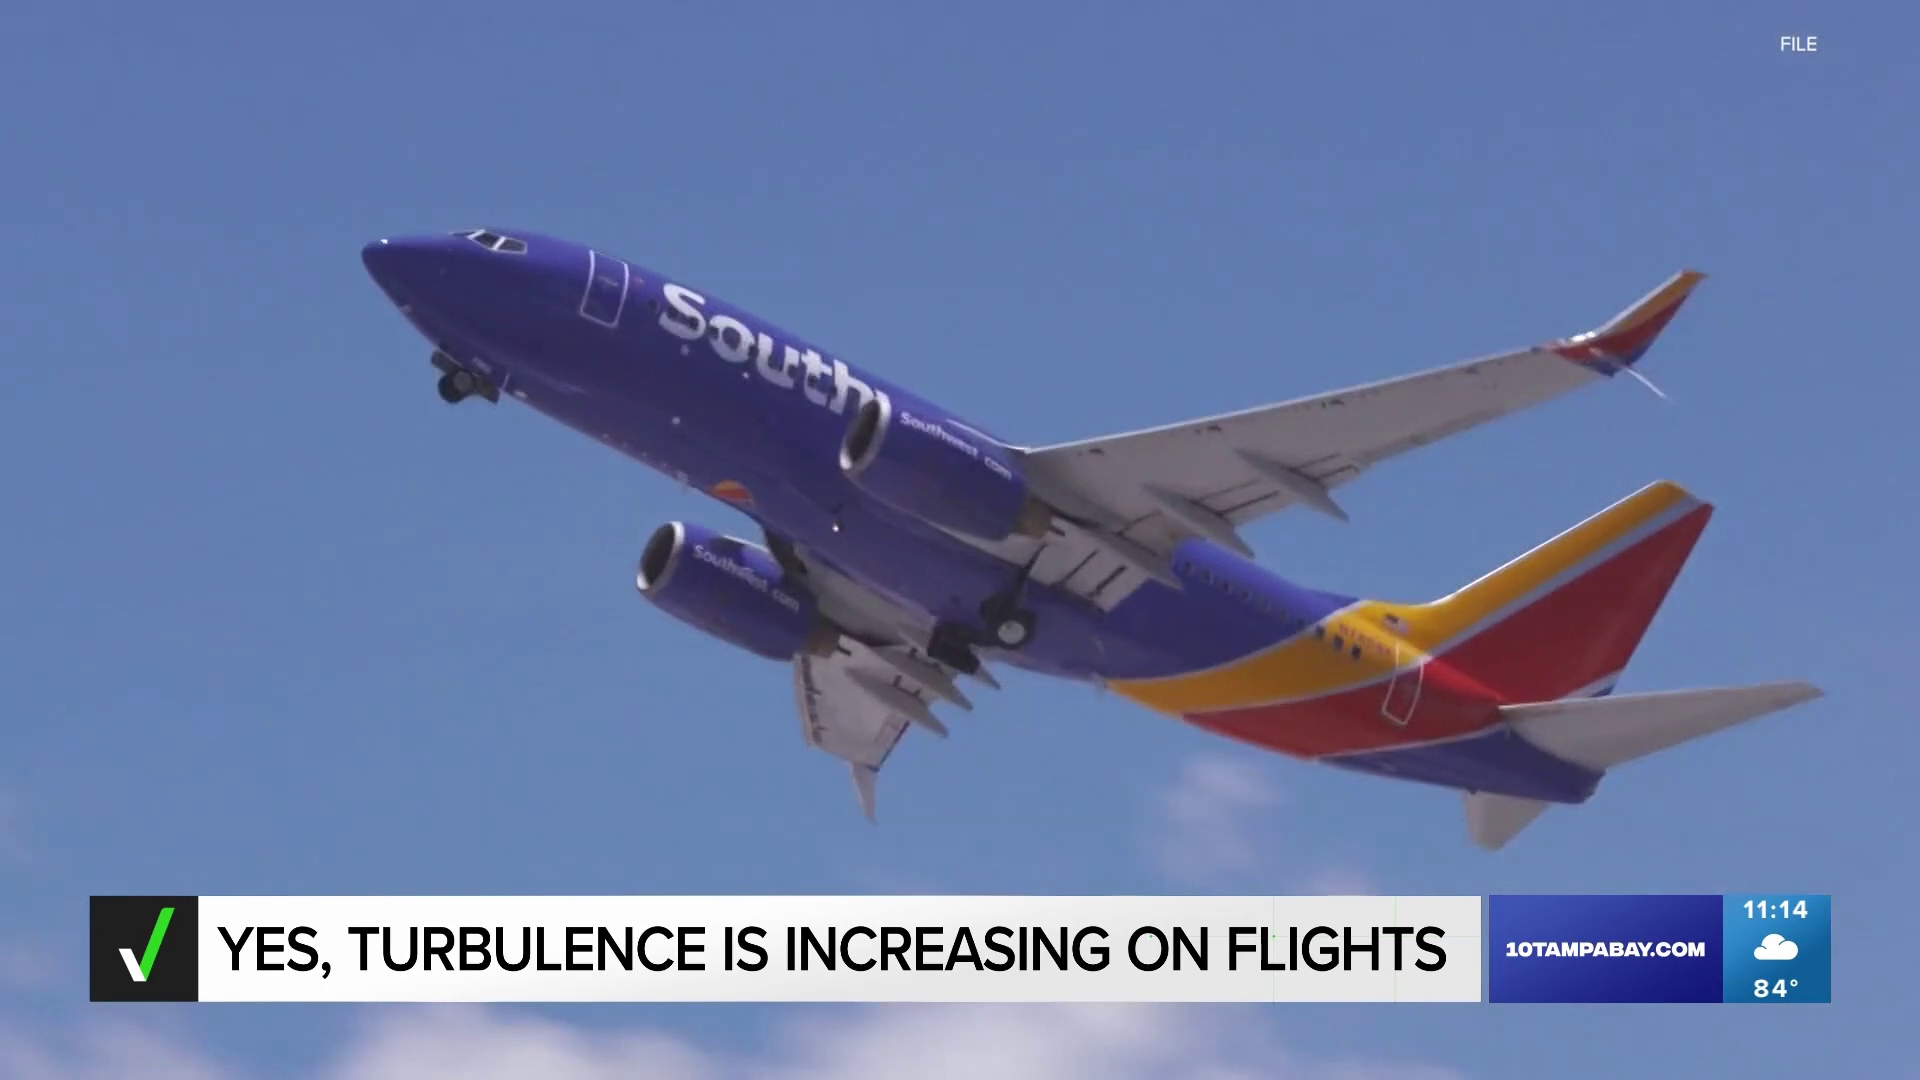 “As long as the temperature continues to get warmer, we’re going to see more turbulence. The two are directly correlated,” an aviation expert told VERIFY.